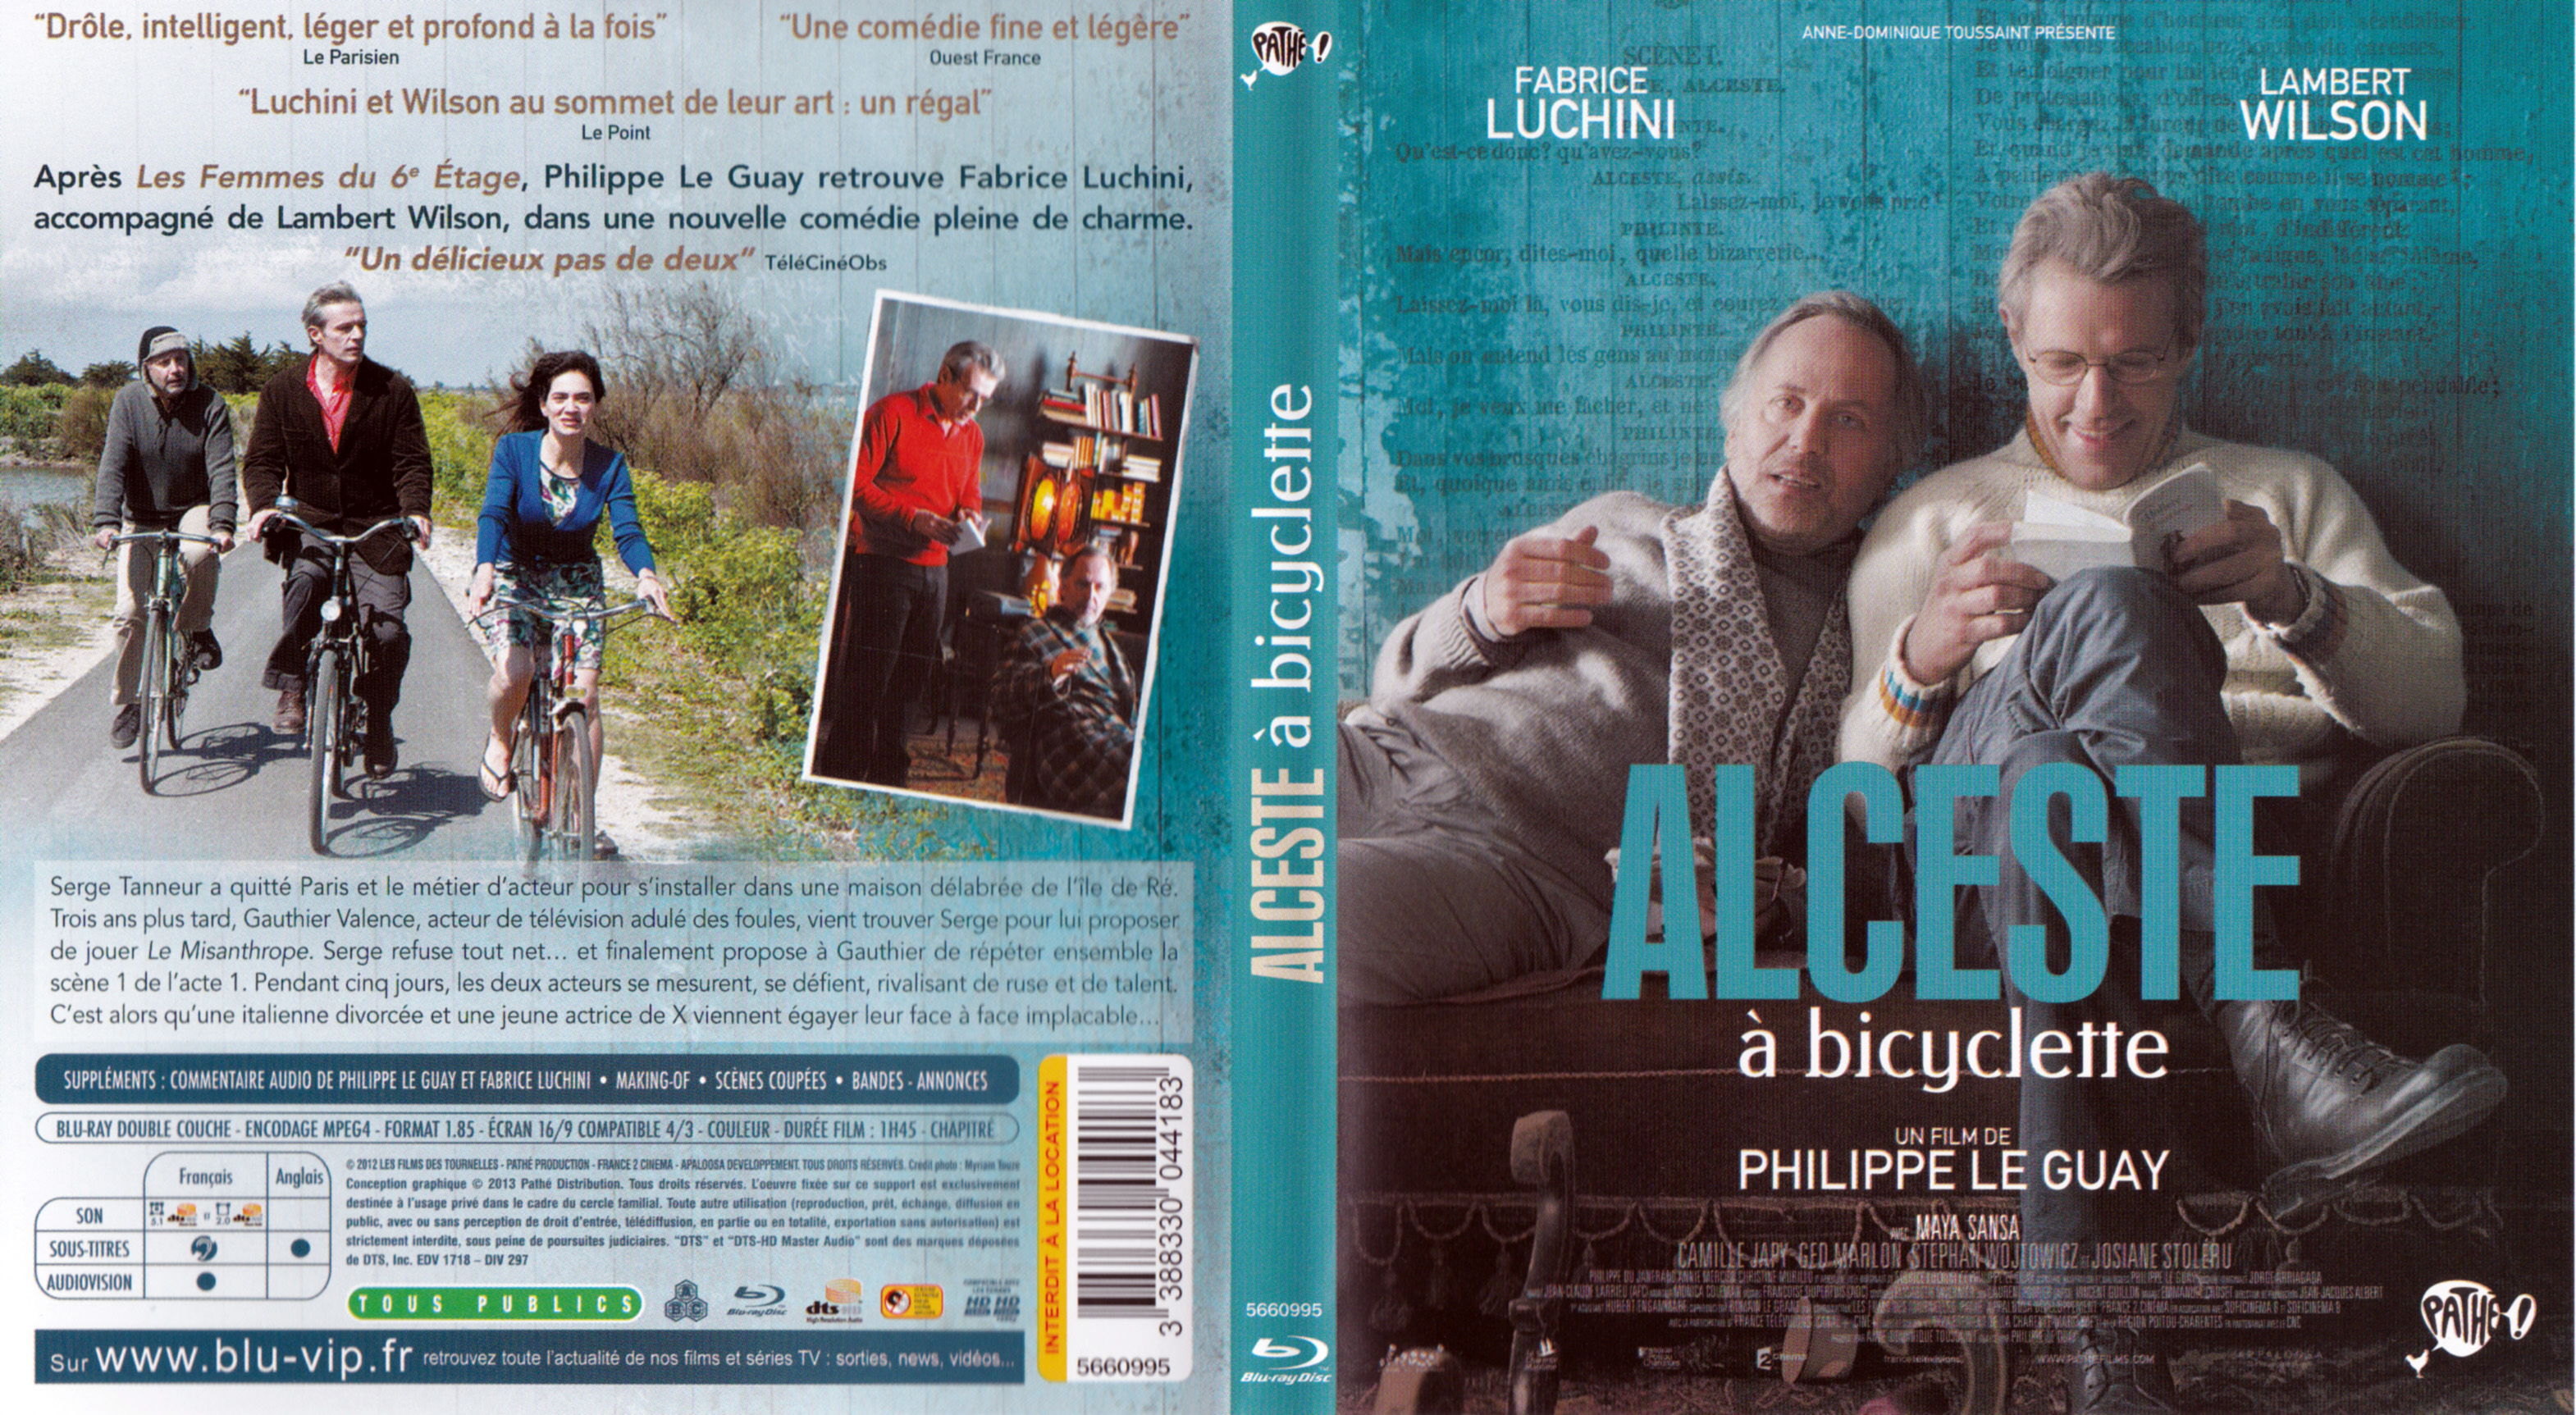 Jaquette DVD Alceste  bicyclette (BLU-RAY)